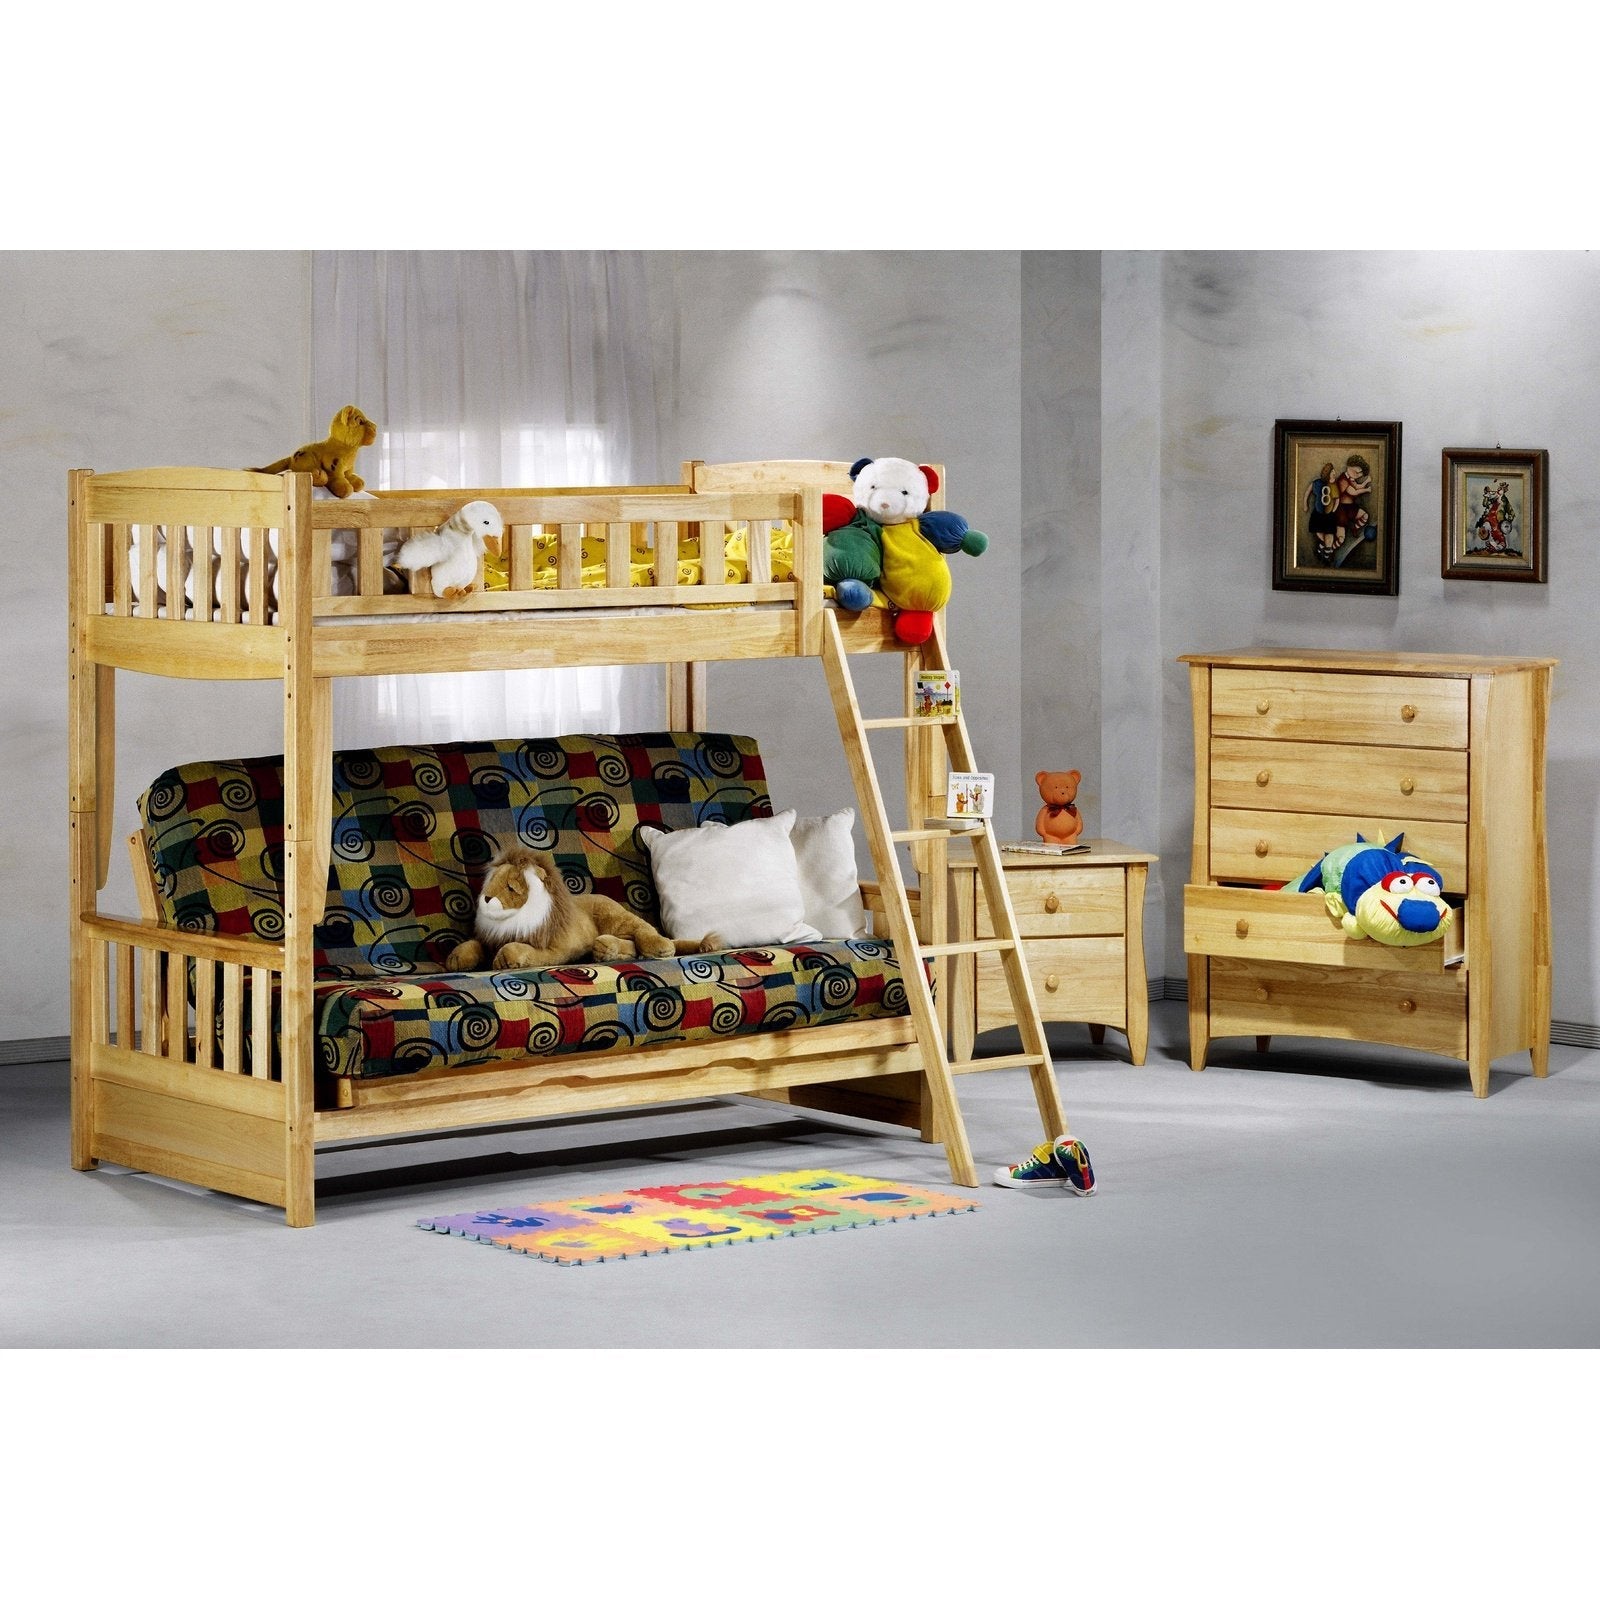 Night and Day Furniture Spices Cinnamon Twin/Futon Bunk Bed - New Star Living